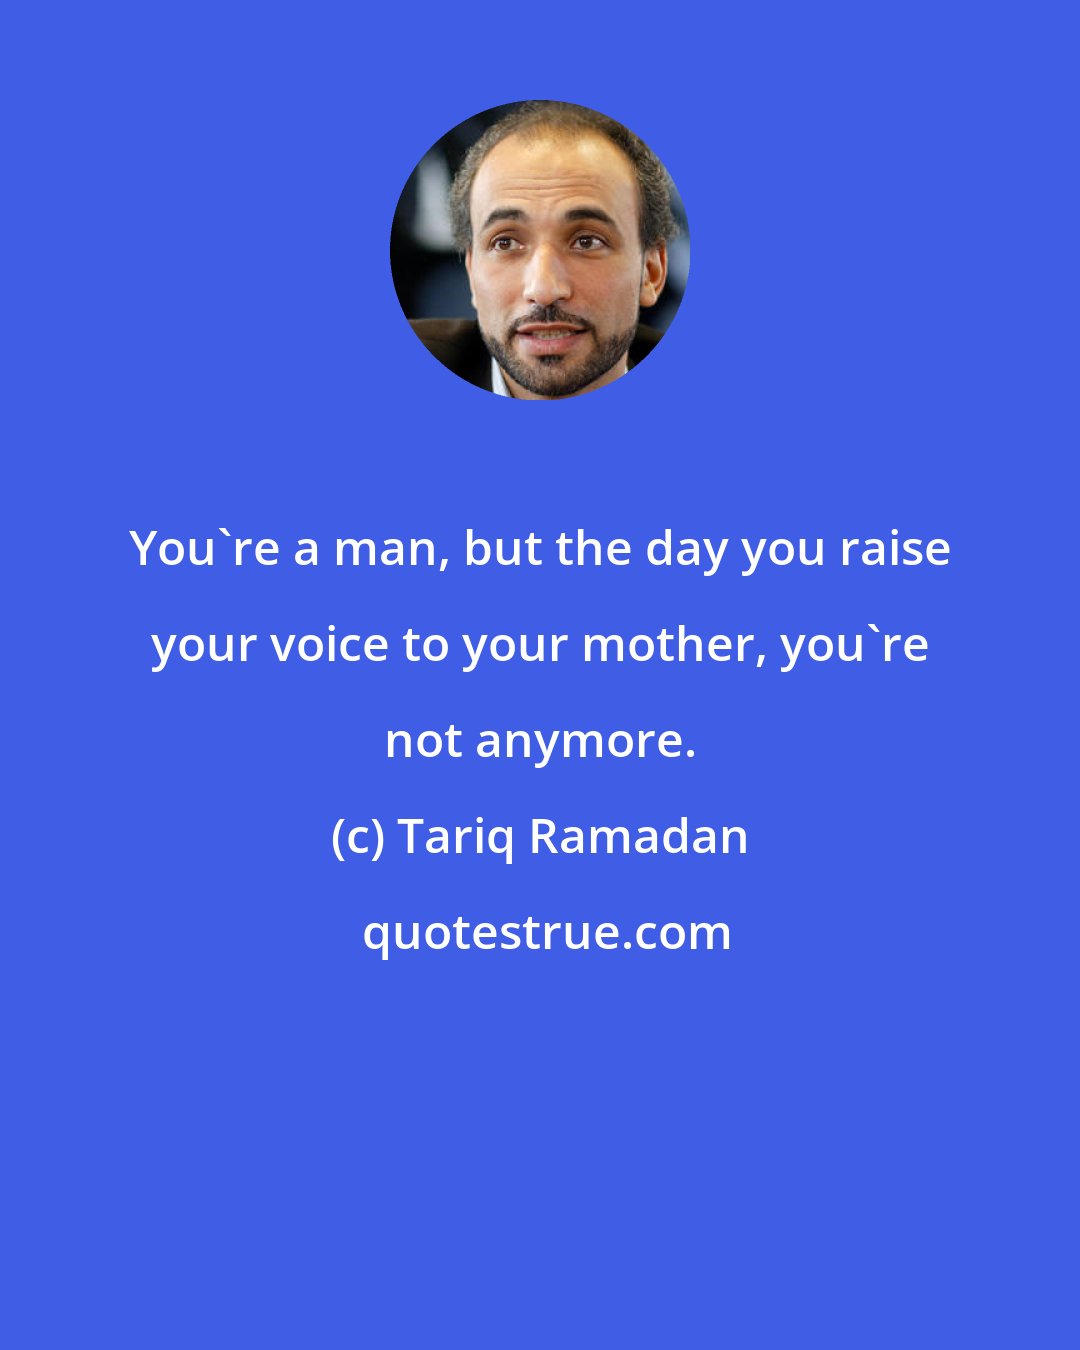 Tariq Ramadan: You're a man, but the day you raise your voice to your mother, you're not anymore.